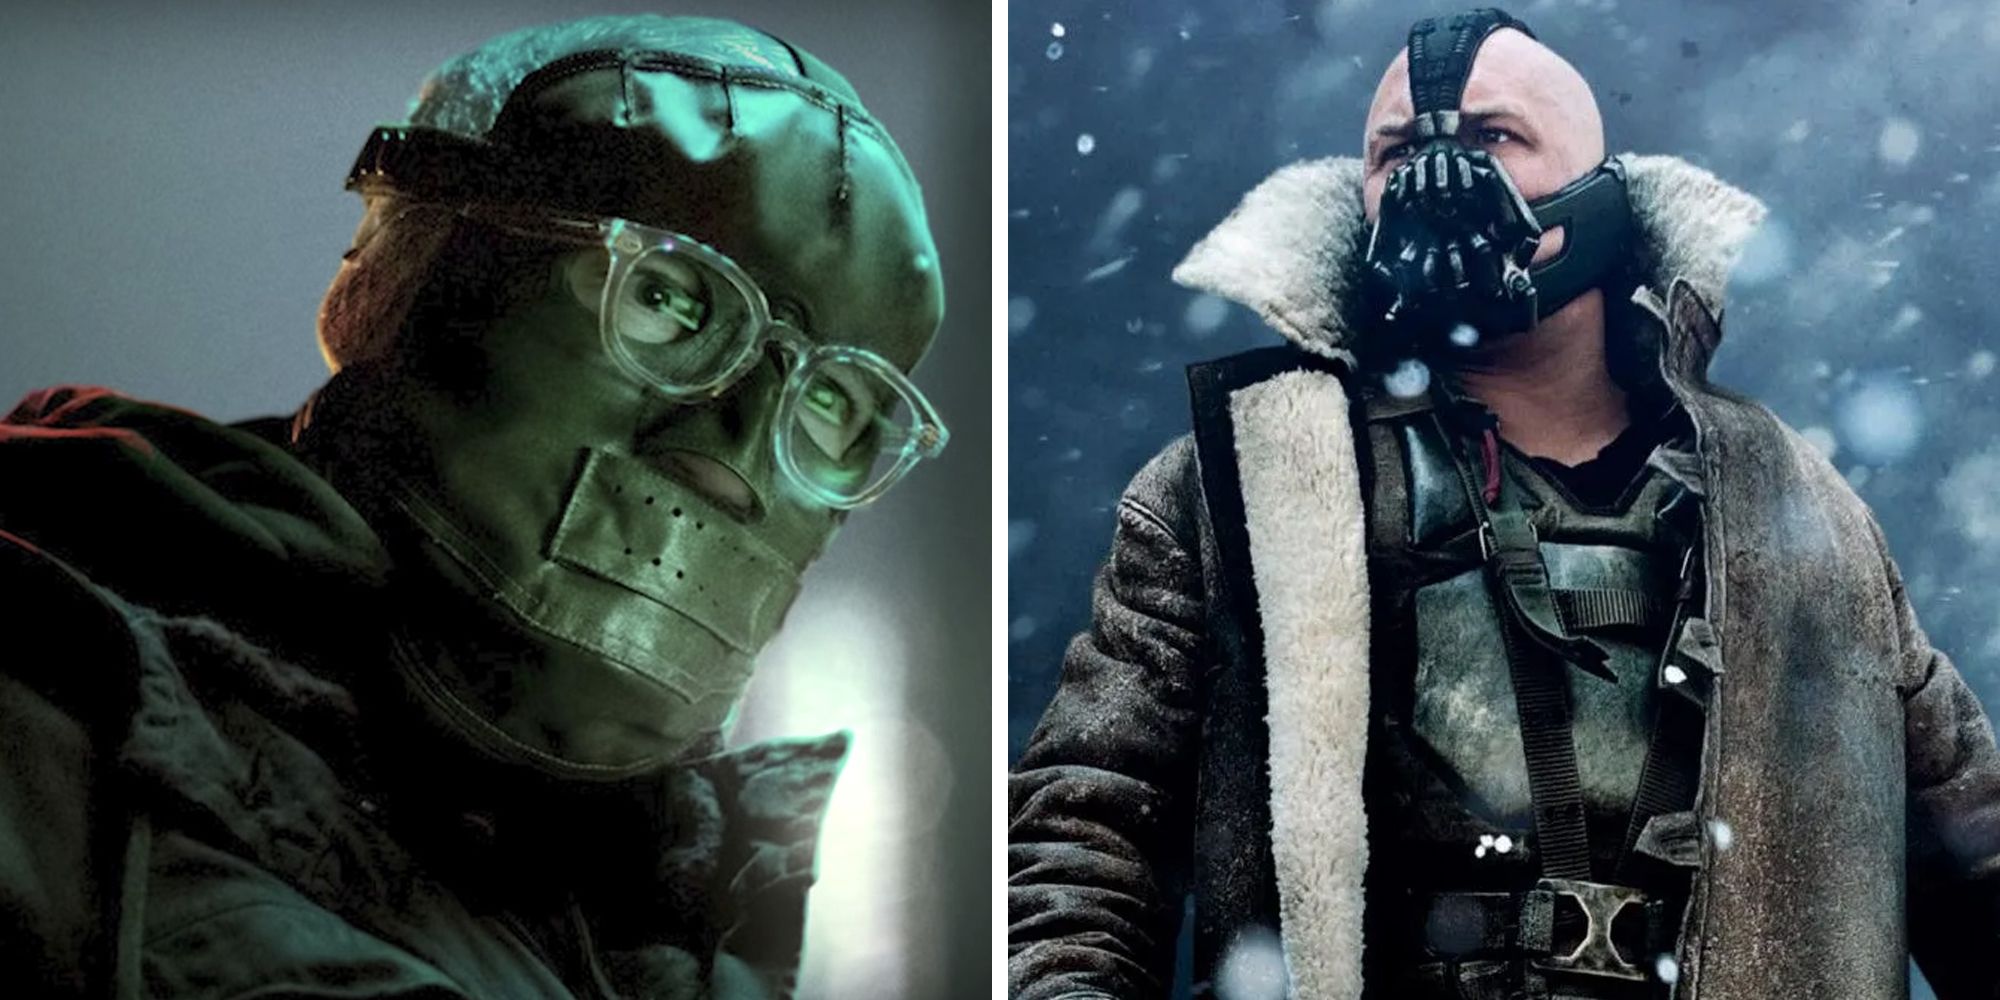 The Riddler and Bane in a collage